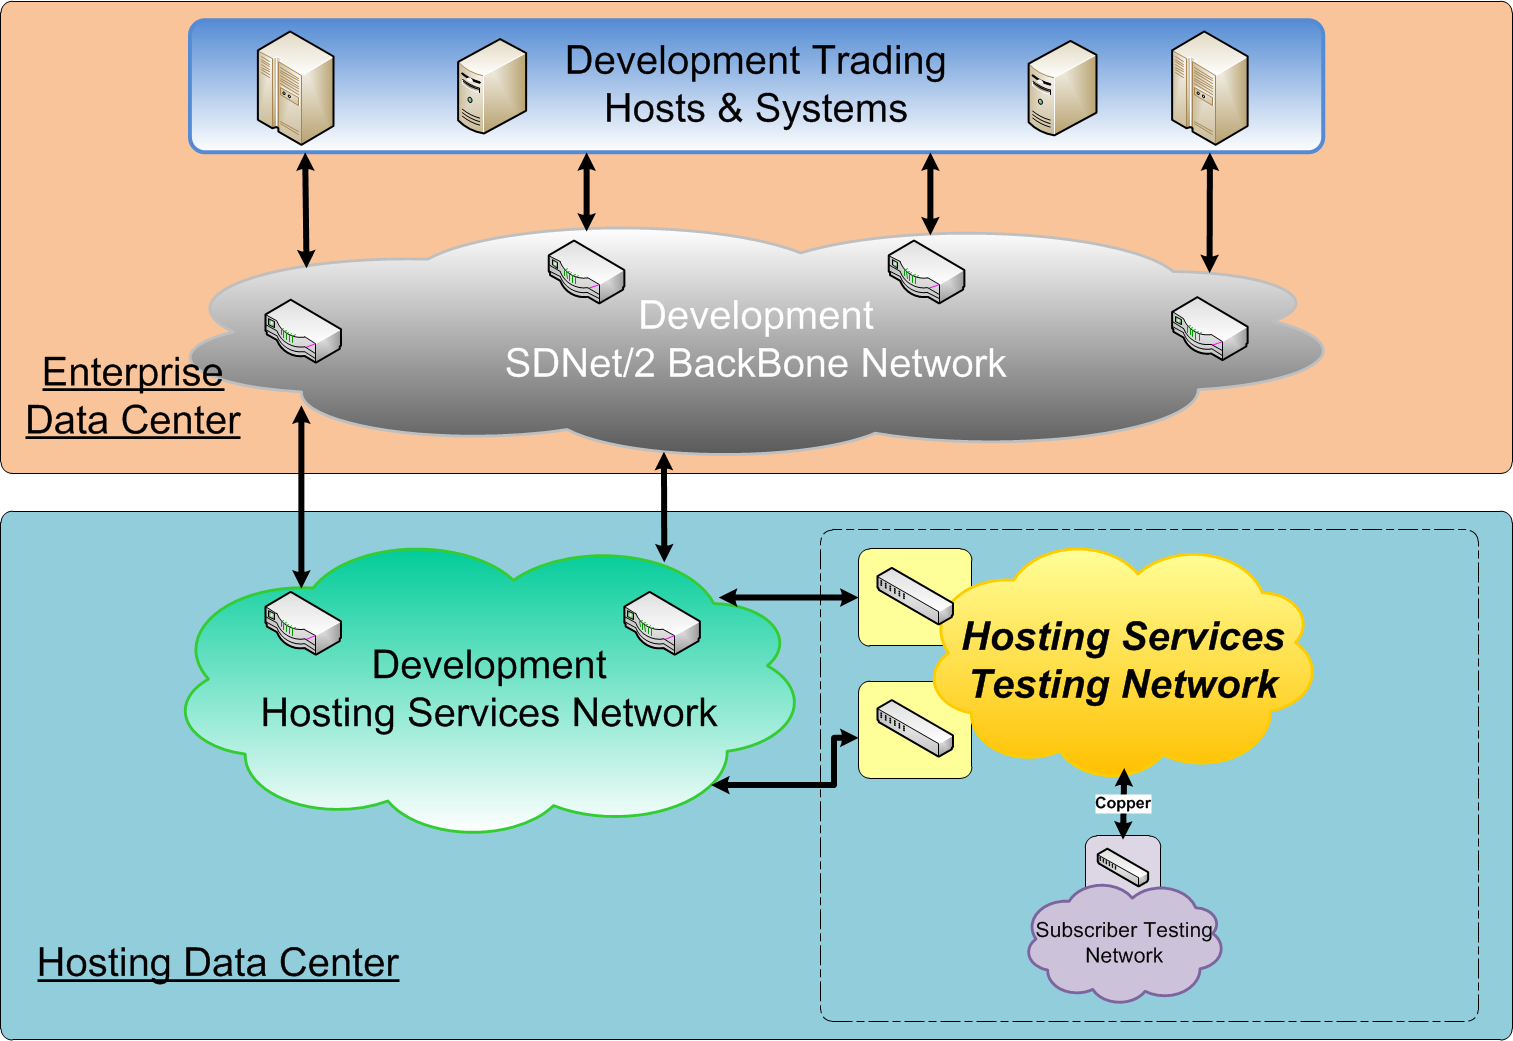 Hosting Services Testing Network (HSTN) Support for various HKEx Orion Technology initatives Orion Market Data Orion Central Gateway Genium Upgrade Eligible for Hosting Services users Exchange